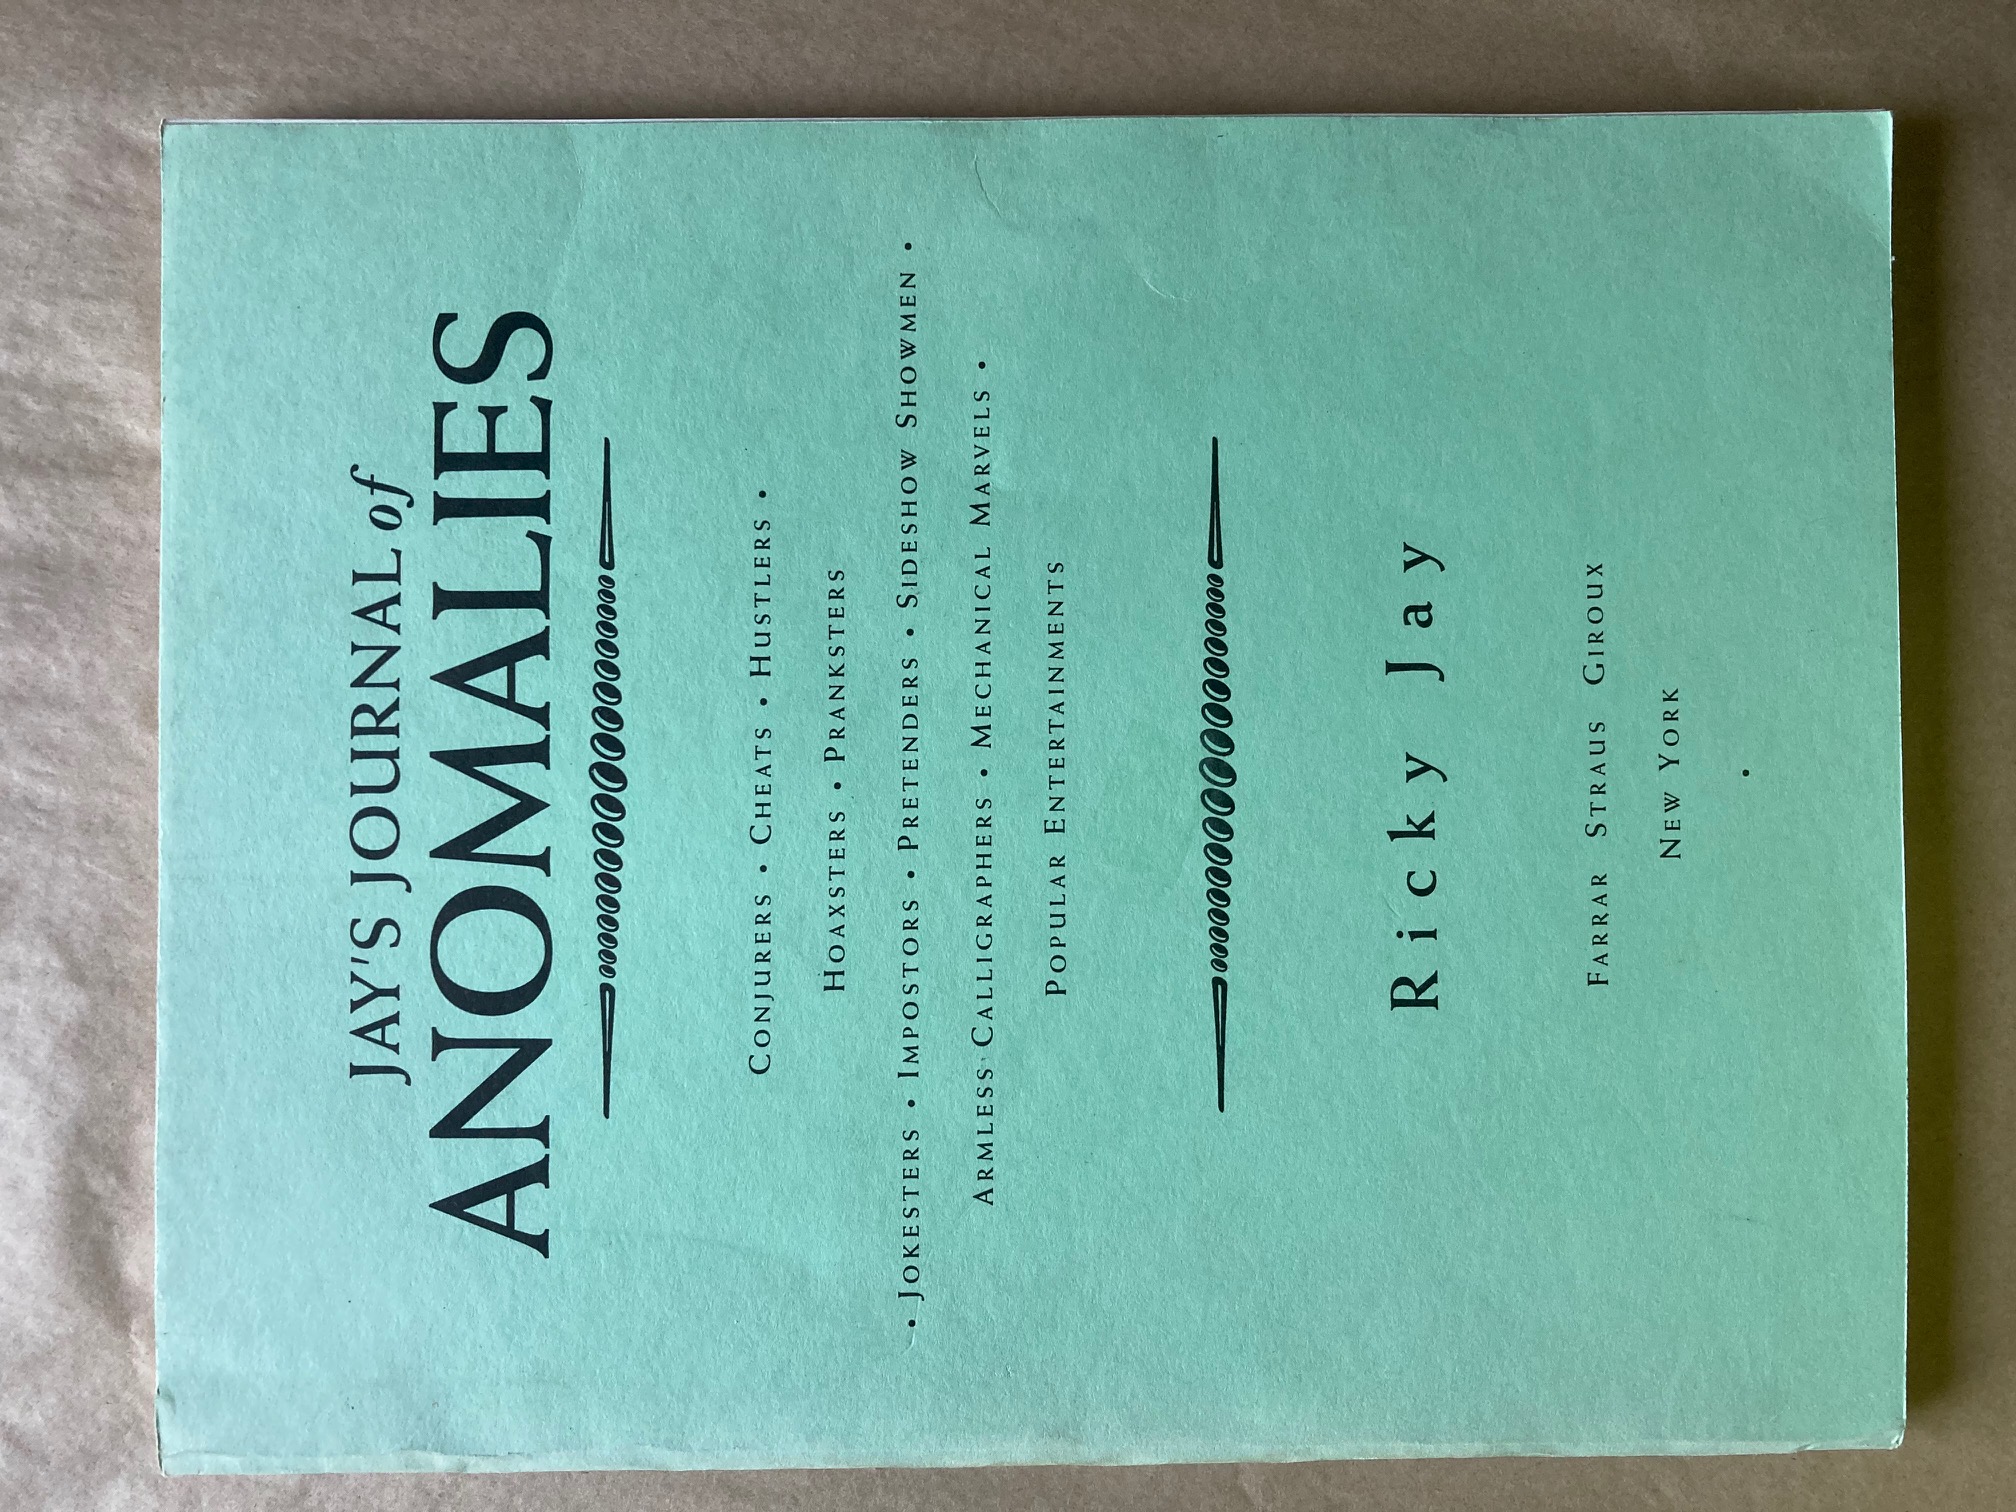 Jay's Journal of Anomalies : Conjurers, Cheats, Hustlers, Hoaxsters, Pranksters, Jokesters, Imposters, Pretenders, Side-Show Showmen, Armless Calligraphers, Mechanical Marvels, Popular Entertainments.